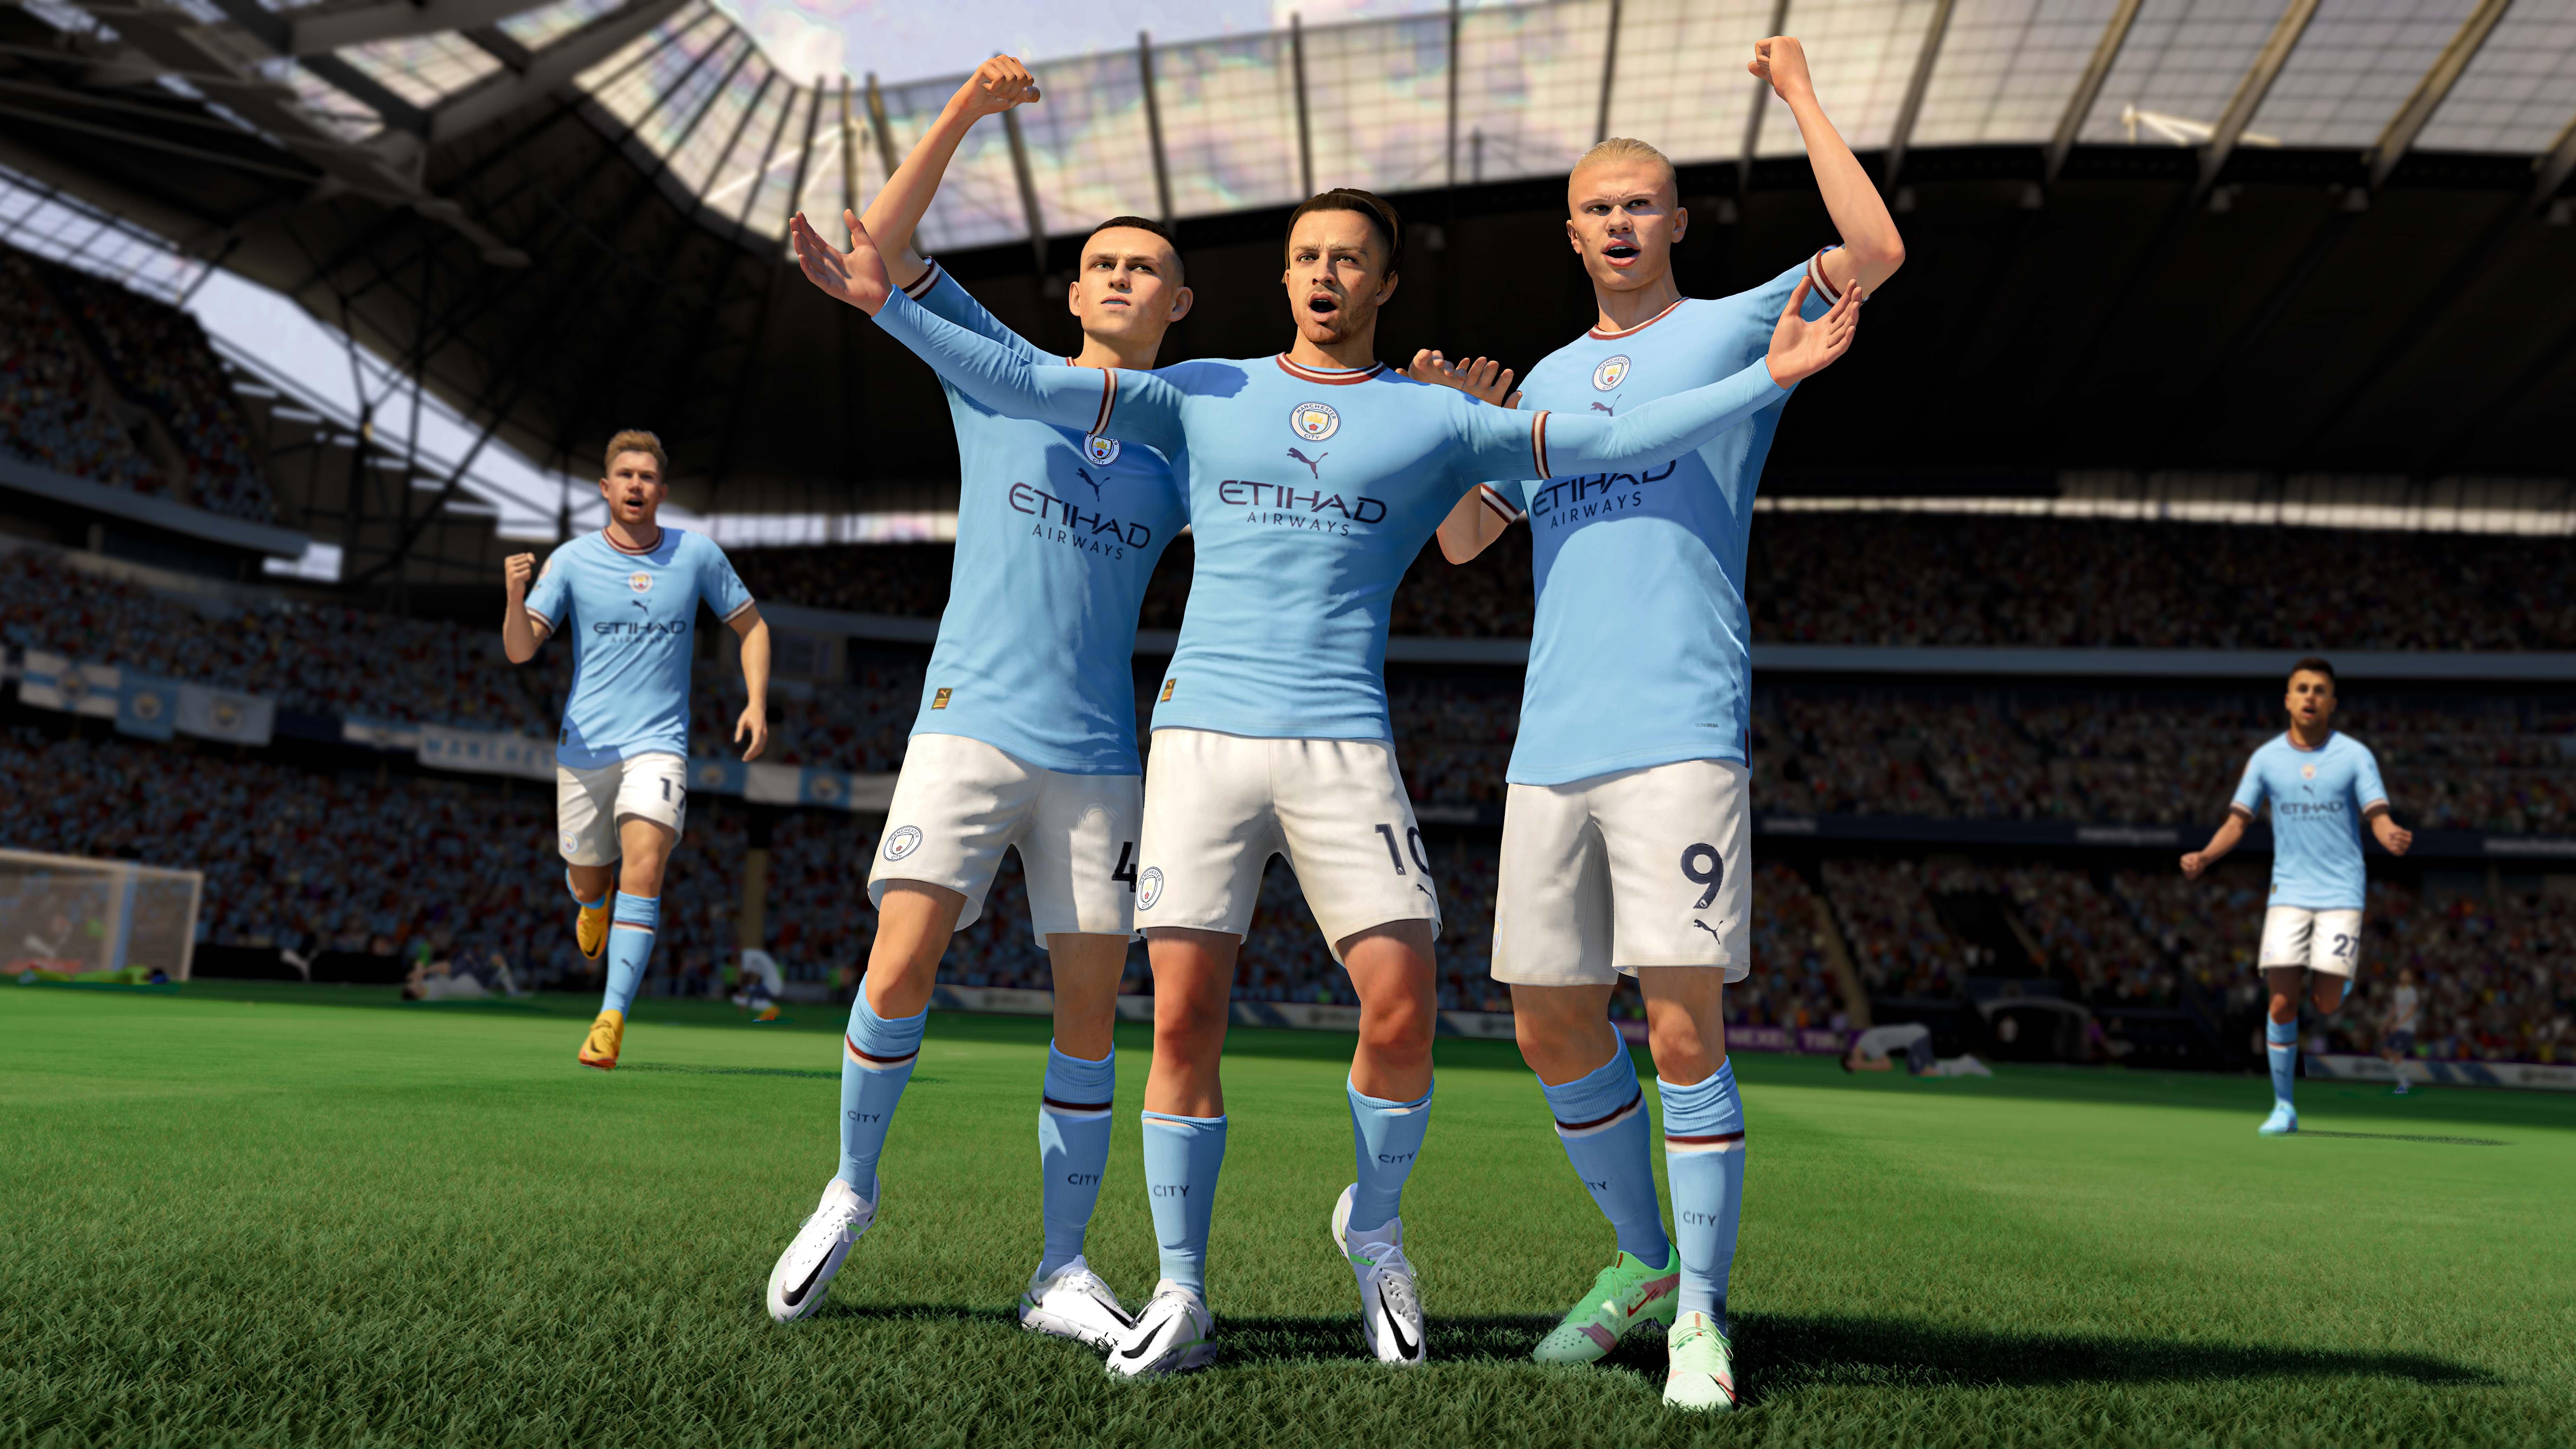 FIFA 23 kicks off the second half of Xbox Game Pass May 2023 free games  lineup today - Mirror Online